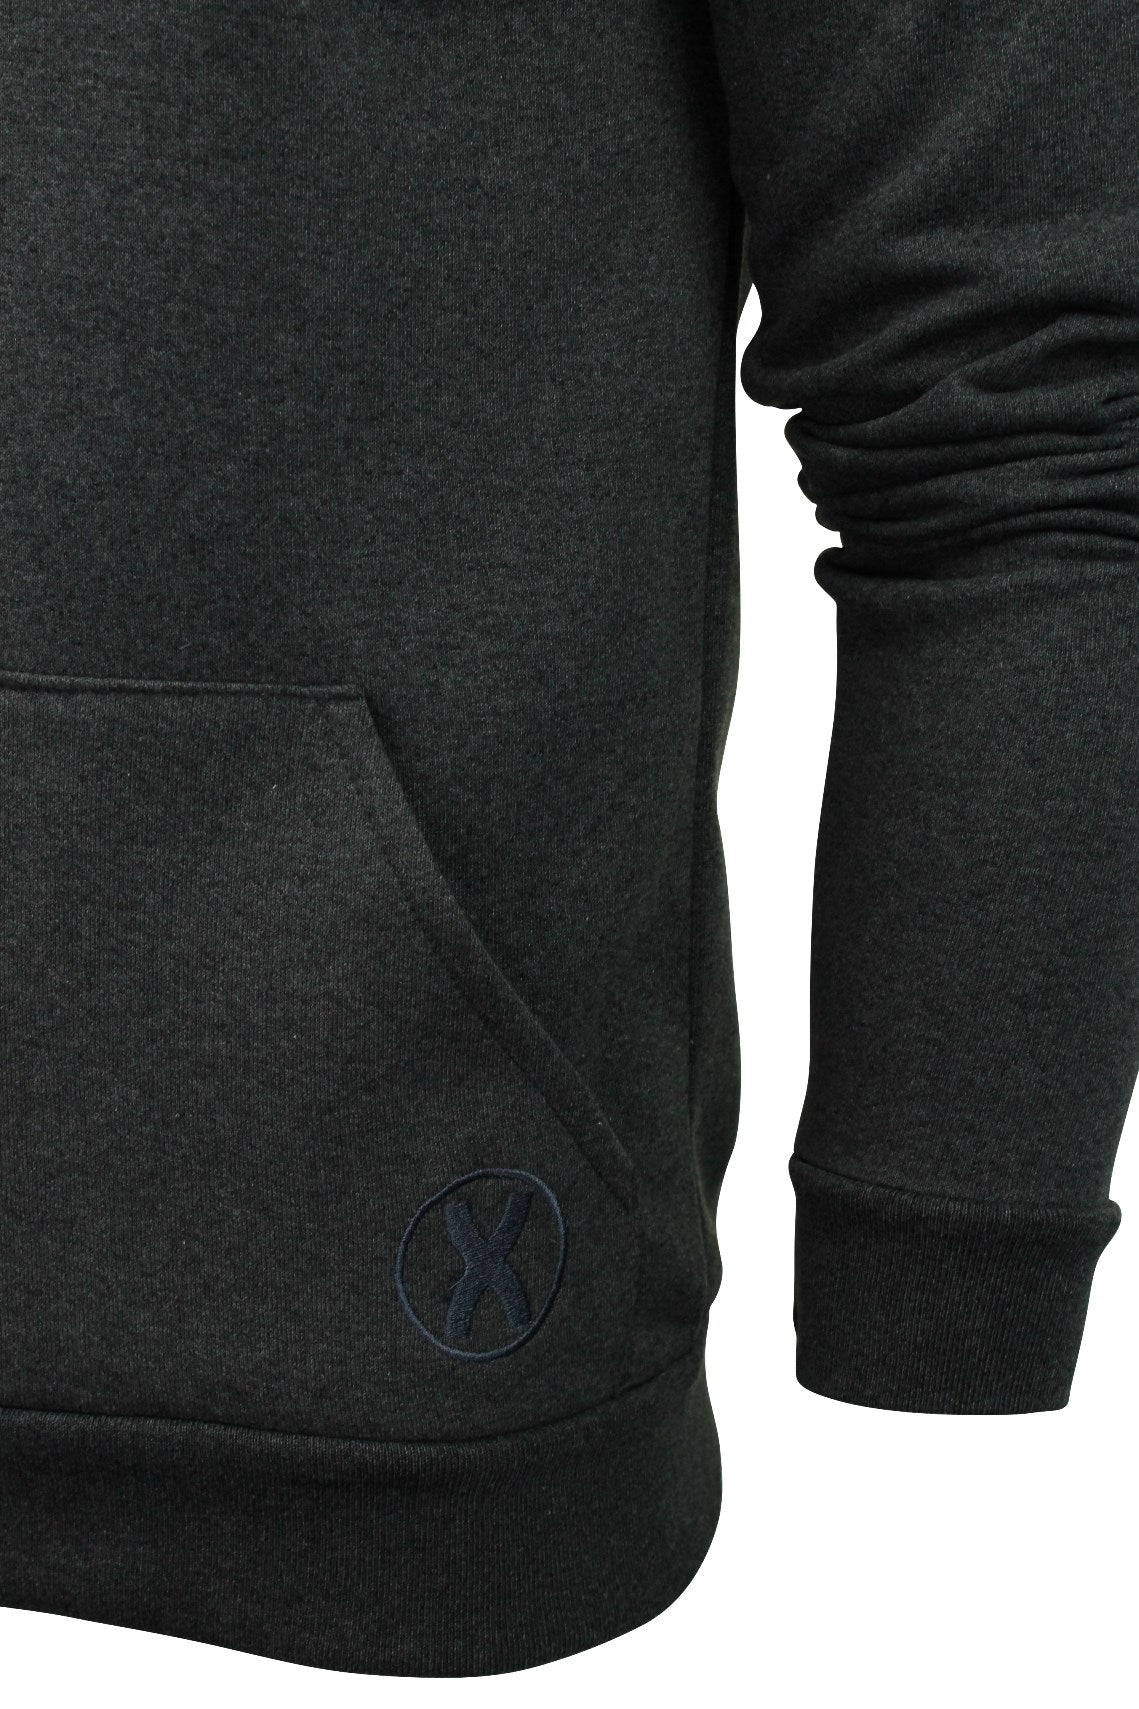 Mens Hoodie Sweat-Top by Xact Clothing Made in England (Charcoal)-2